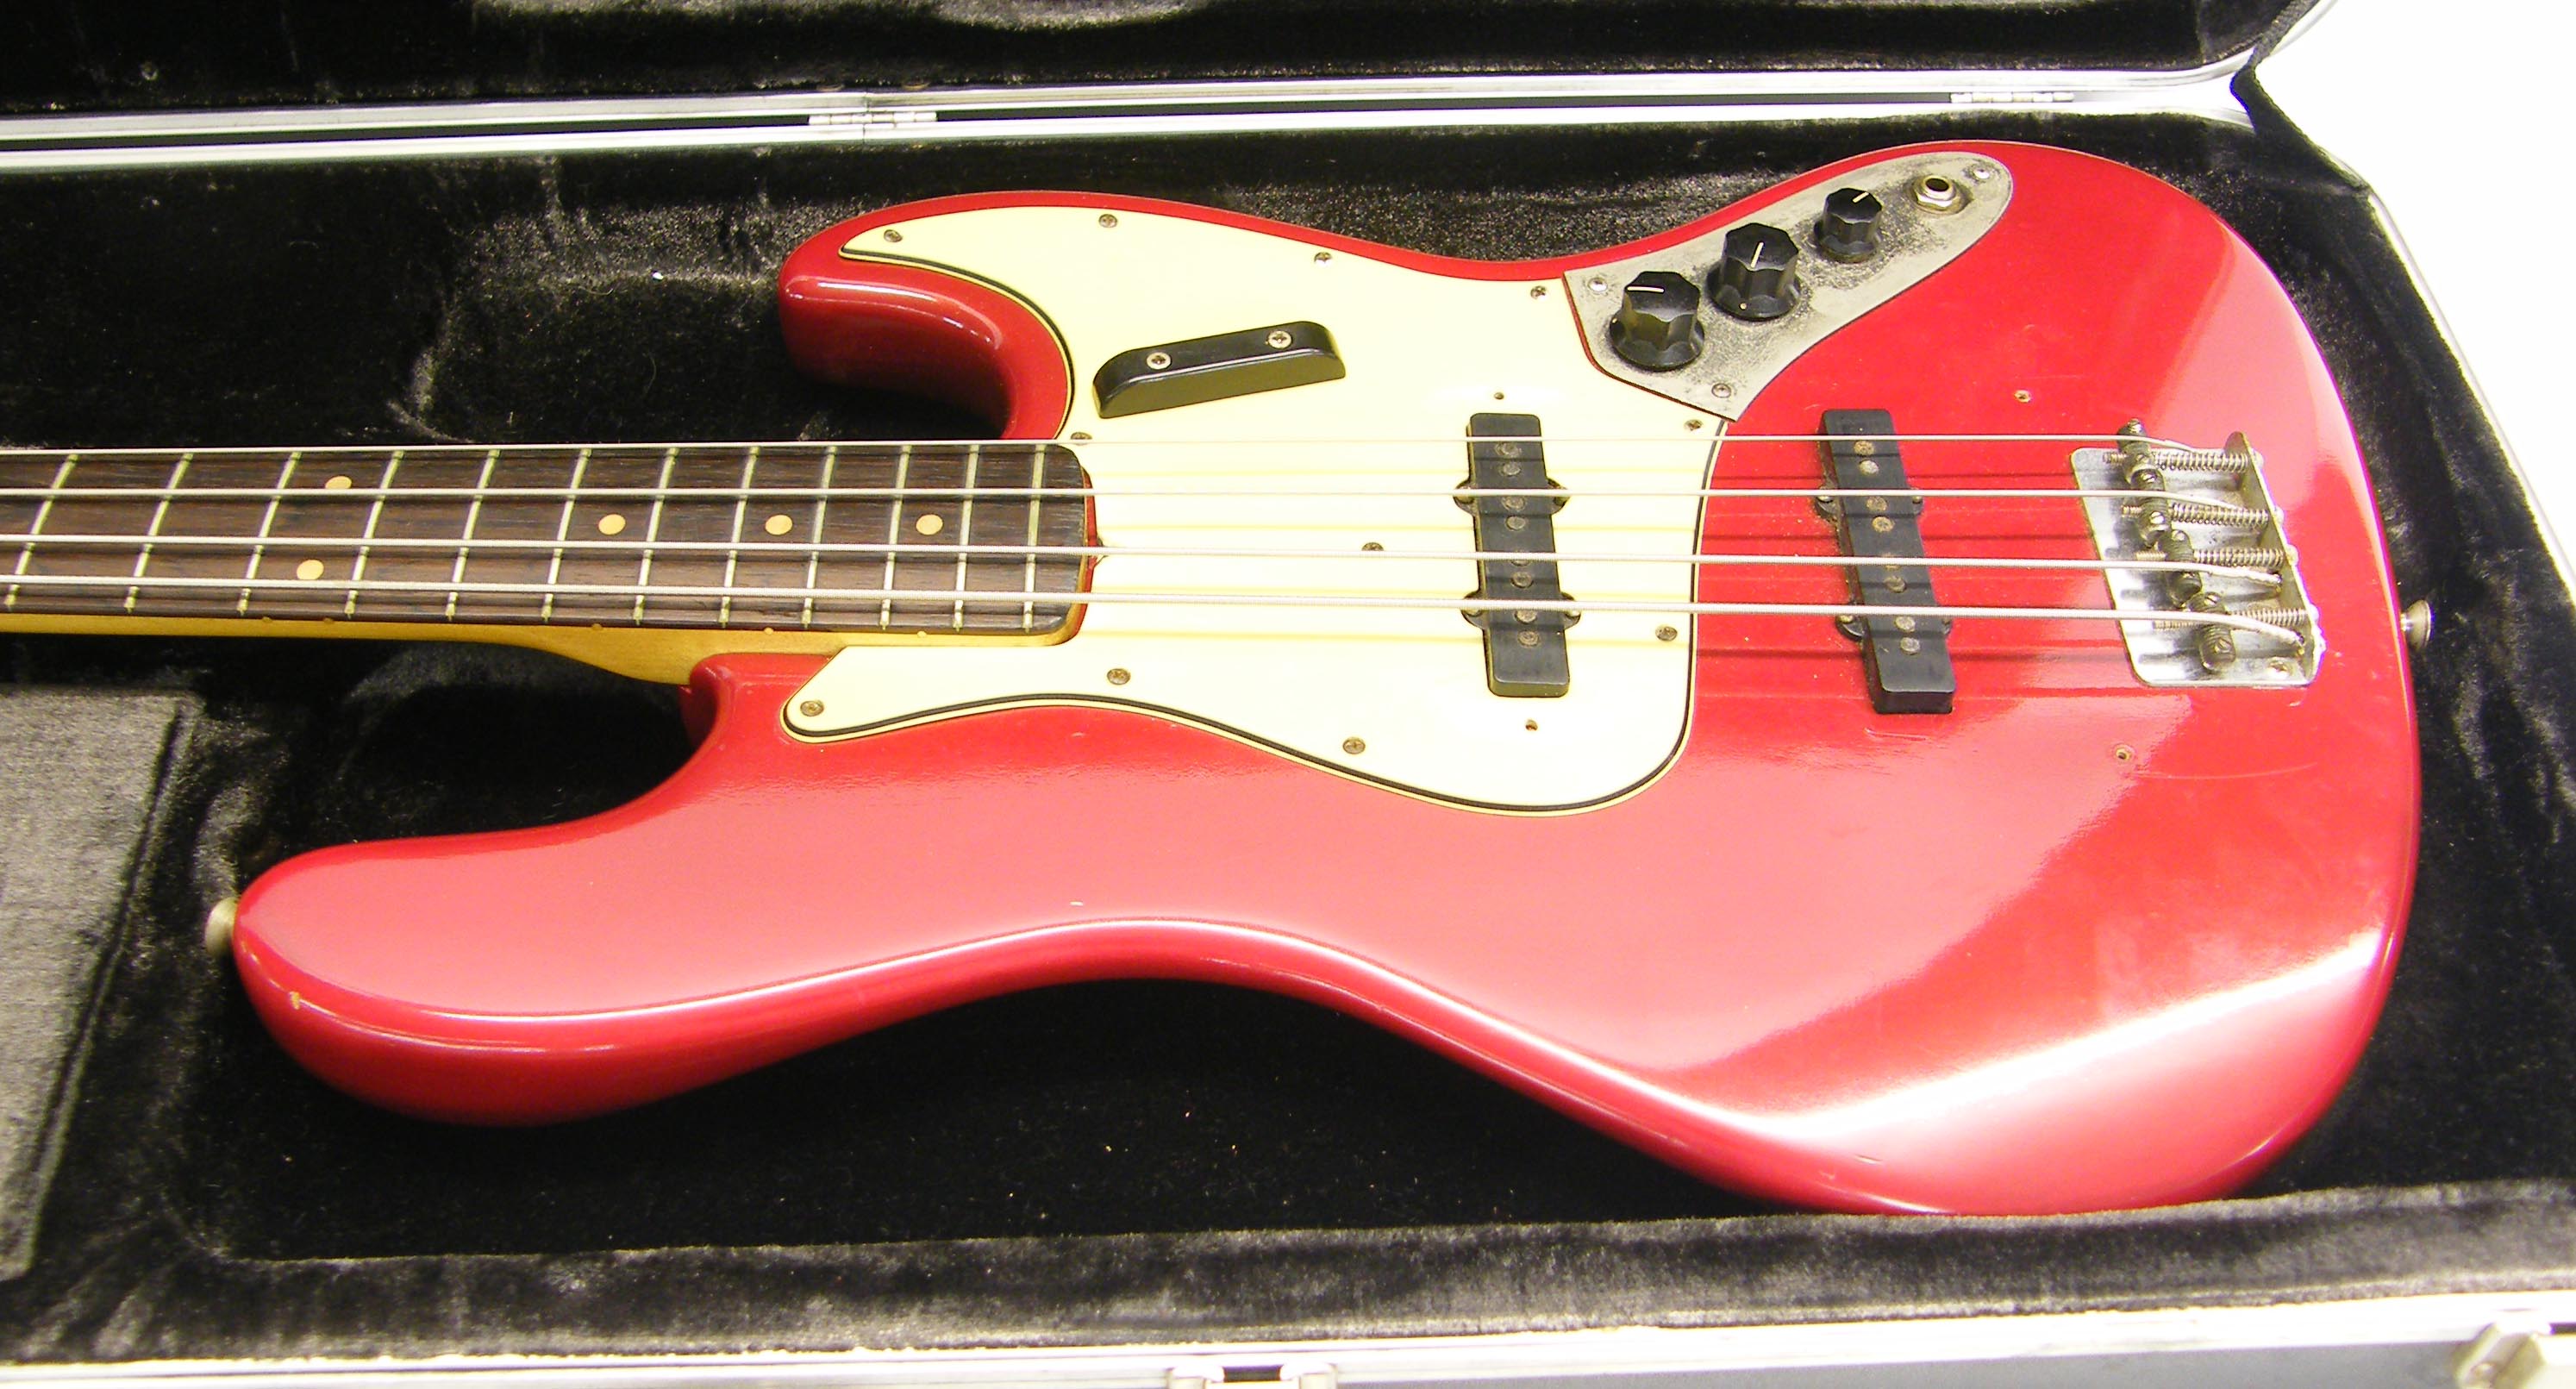 1964 Fender Jazz Bass electric bass guitar, made in USA, ser. no. L21548, red re-finish with various - Image 3 of 9